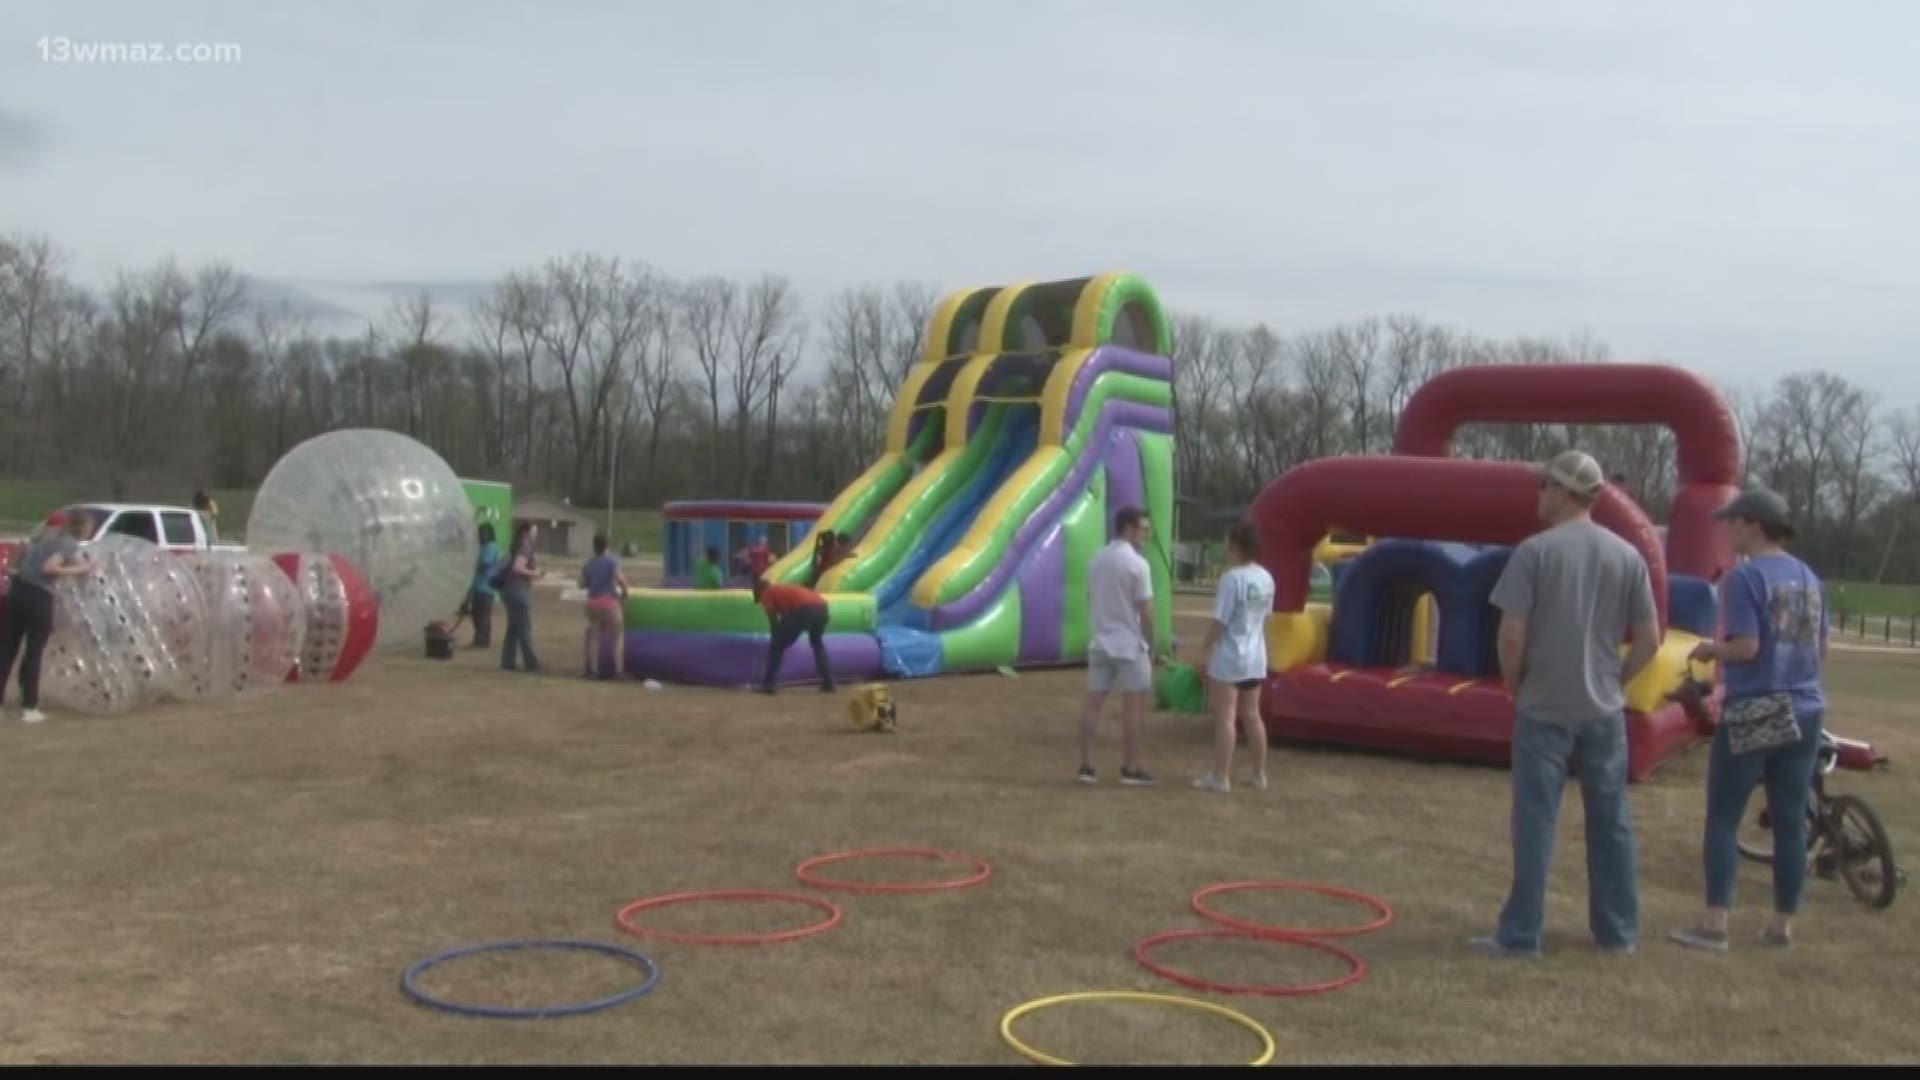 Central City Park turned into an obstacle course filled with bikes and bounce houses for the first ever Kid Fit Strong Challenge. Kids were given free helmets to take part in the bike rodeo, where beginners and expert riders took to the pavement.